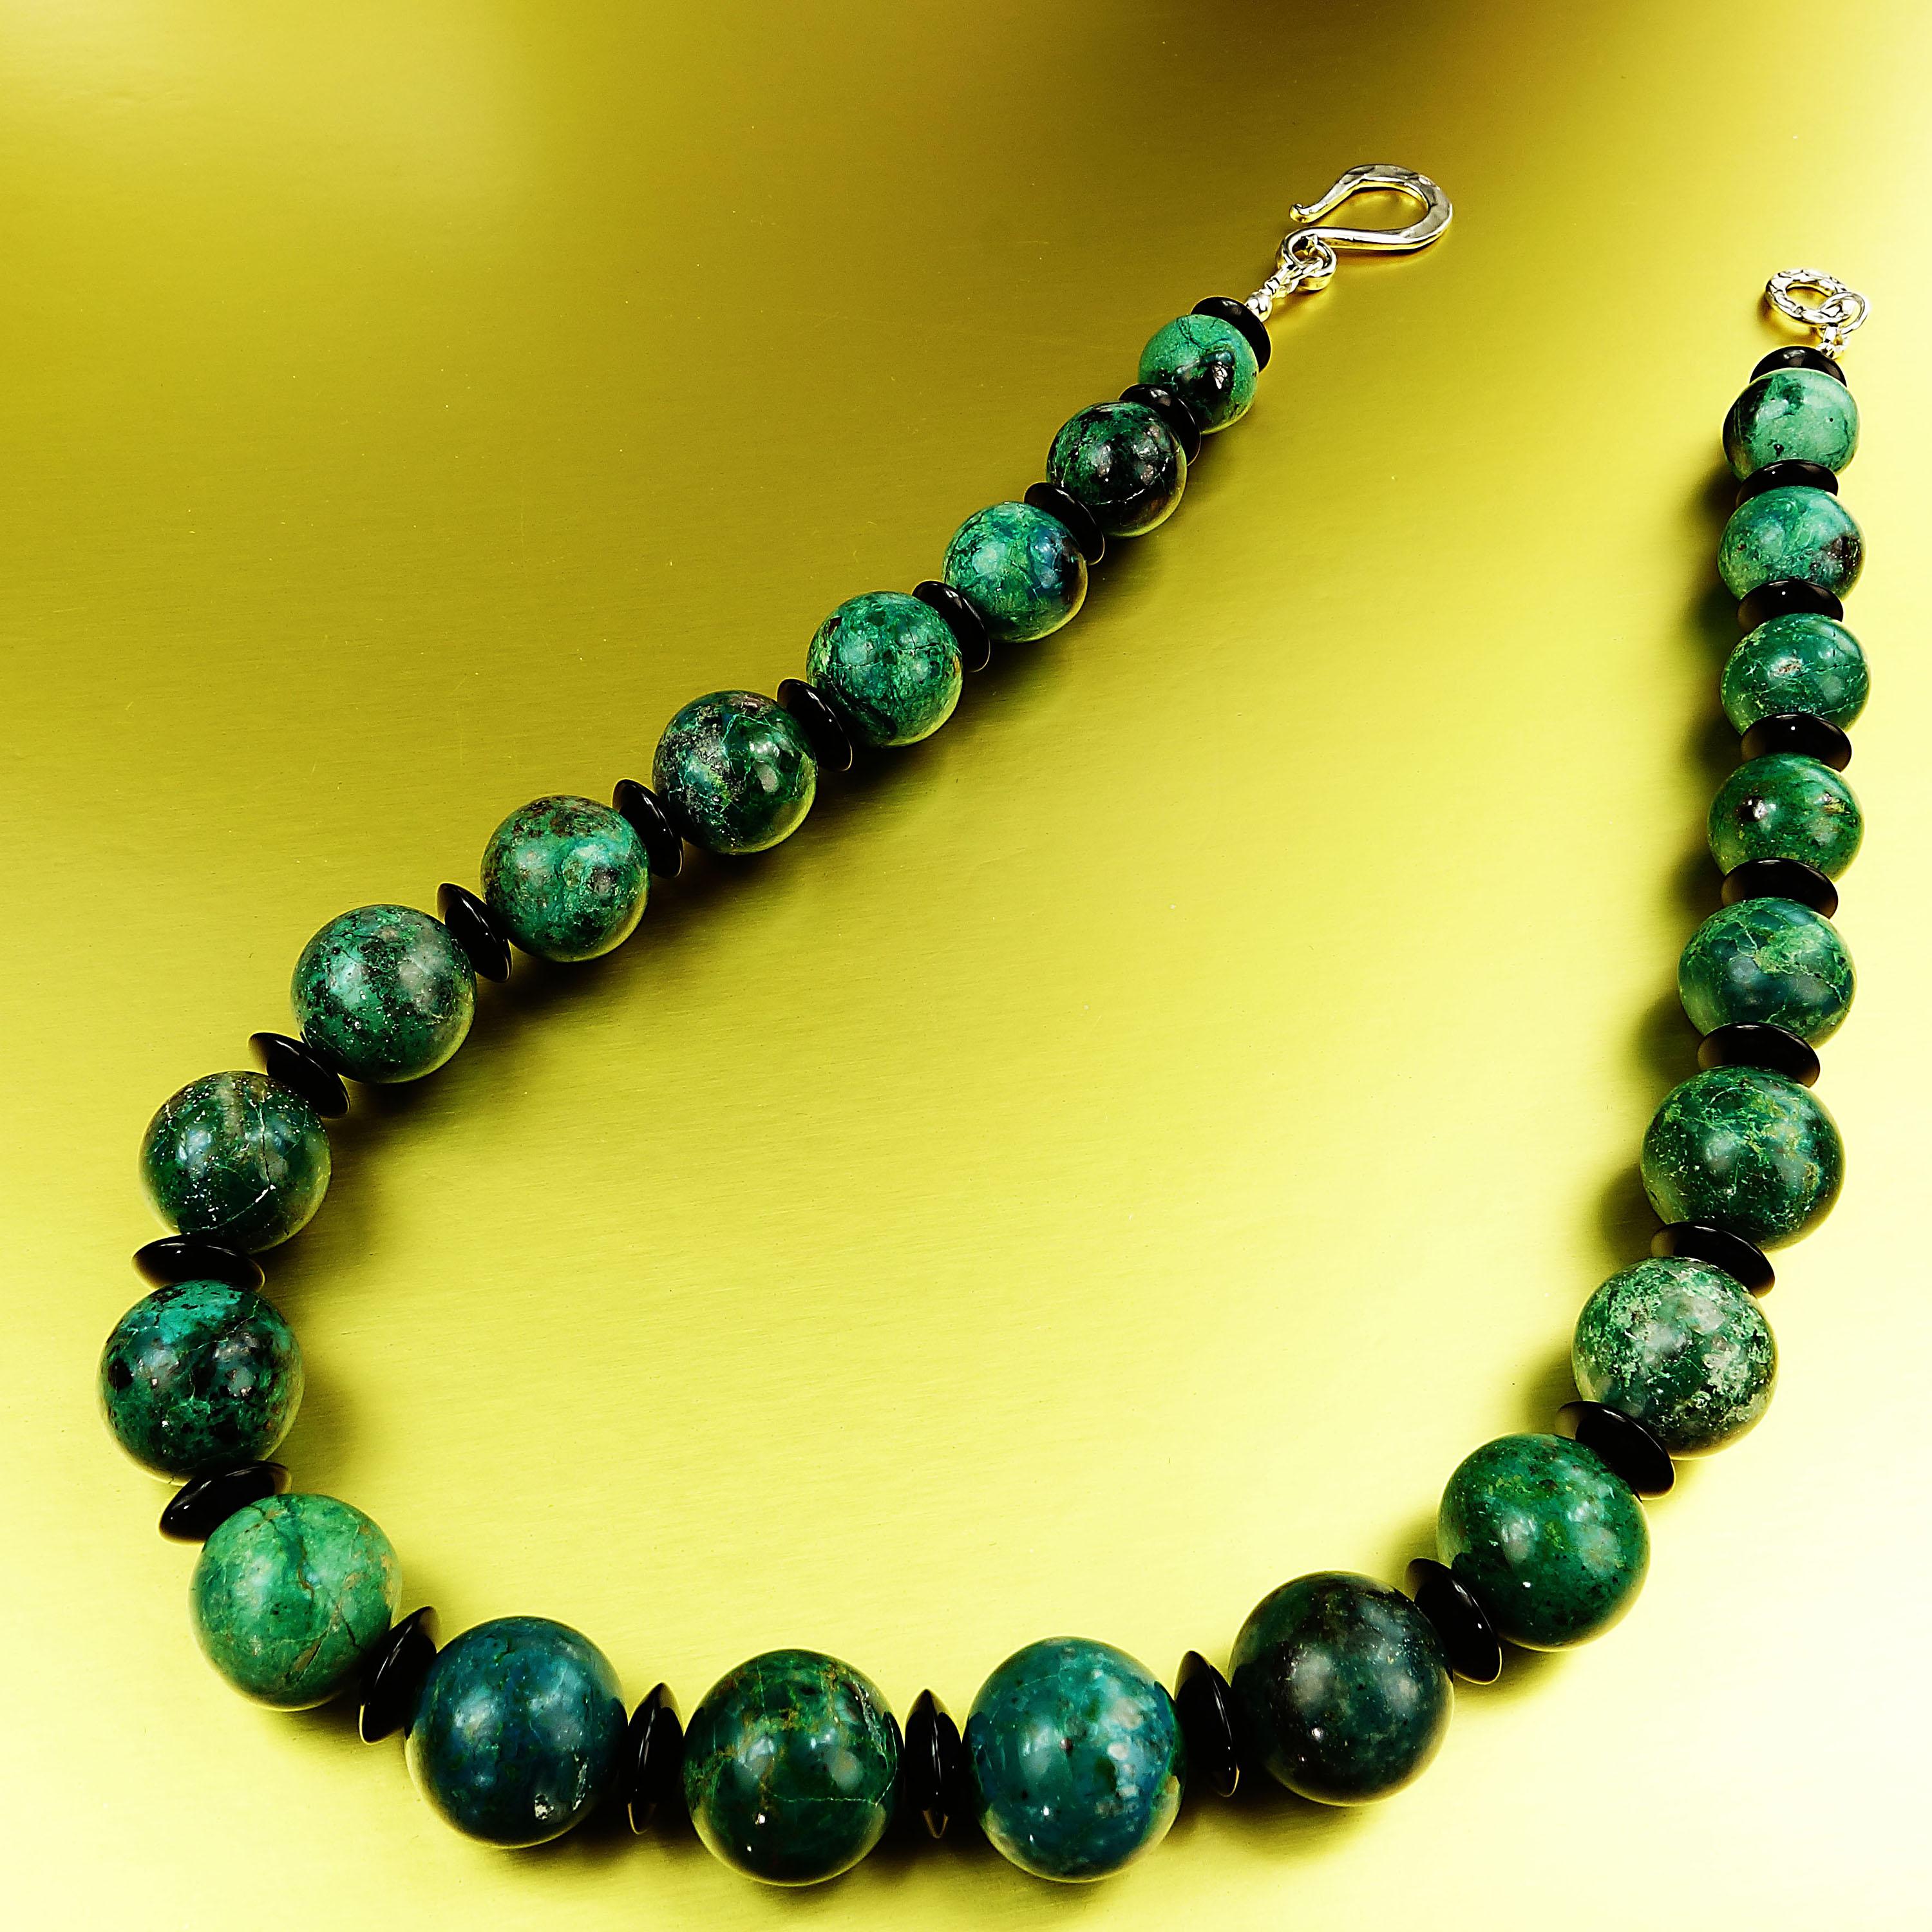 Artisan AJD Graduated Round Chrysocolla and Black Smooth Polished Onyx Necklace